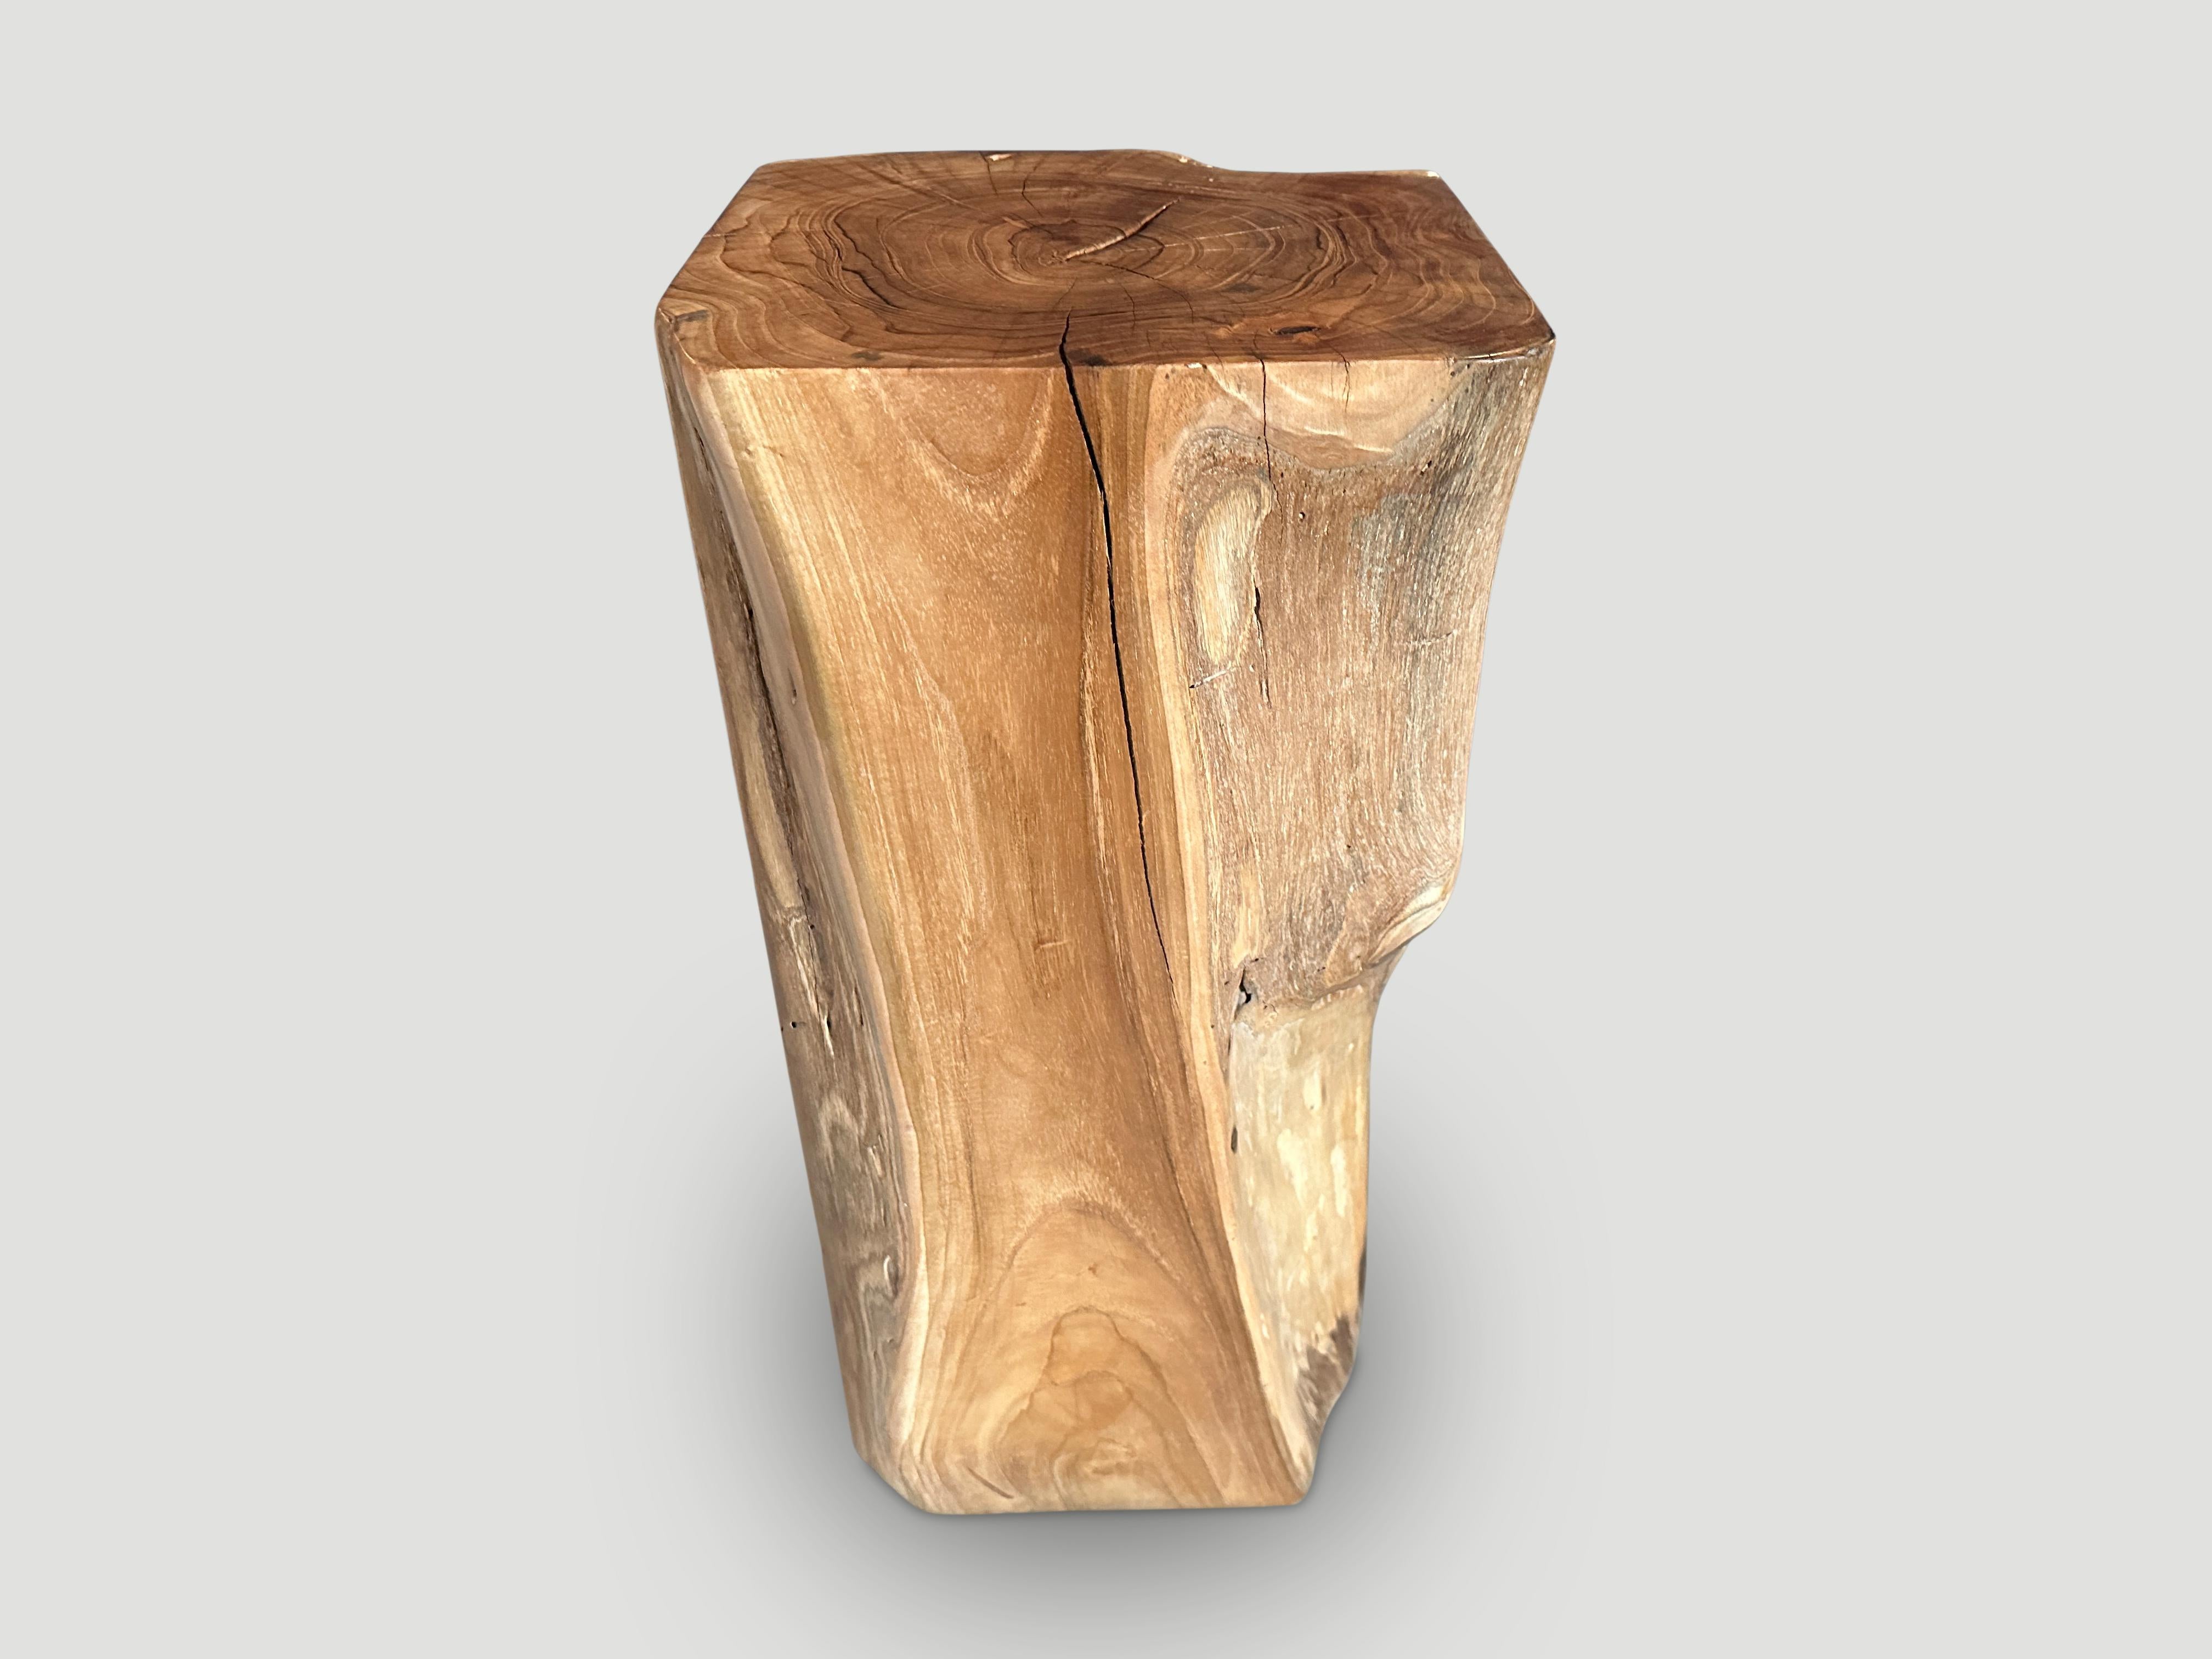 Andrianna Shamaris Organic Teak Wood Pedestal or Side Table In Excellent Condition For Sale In New York, NY